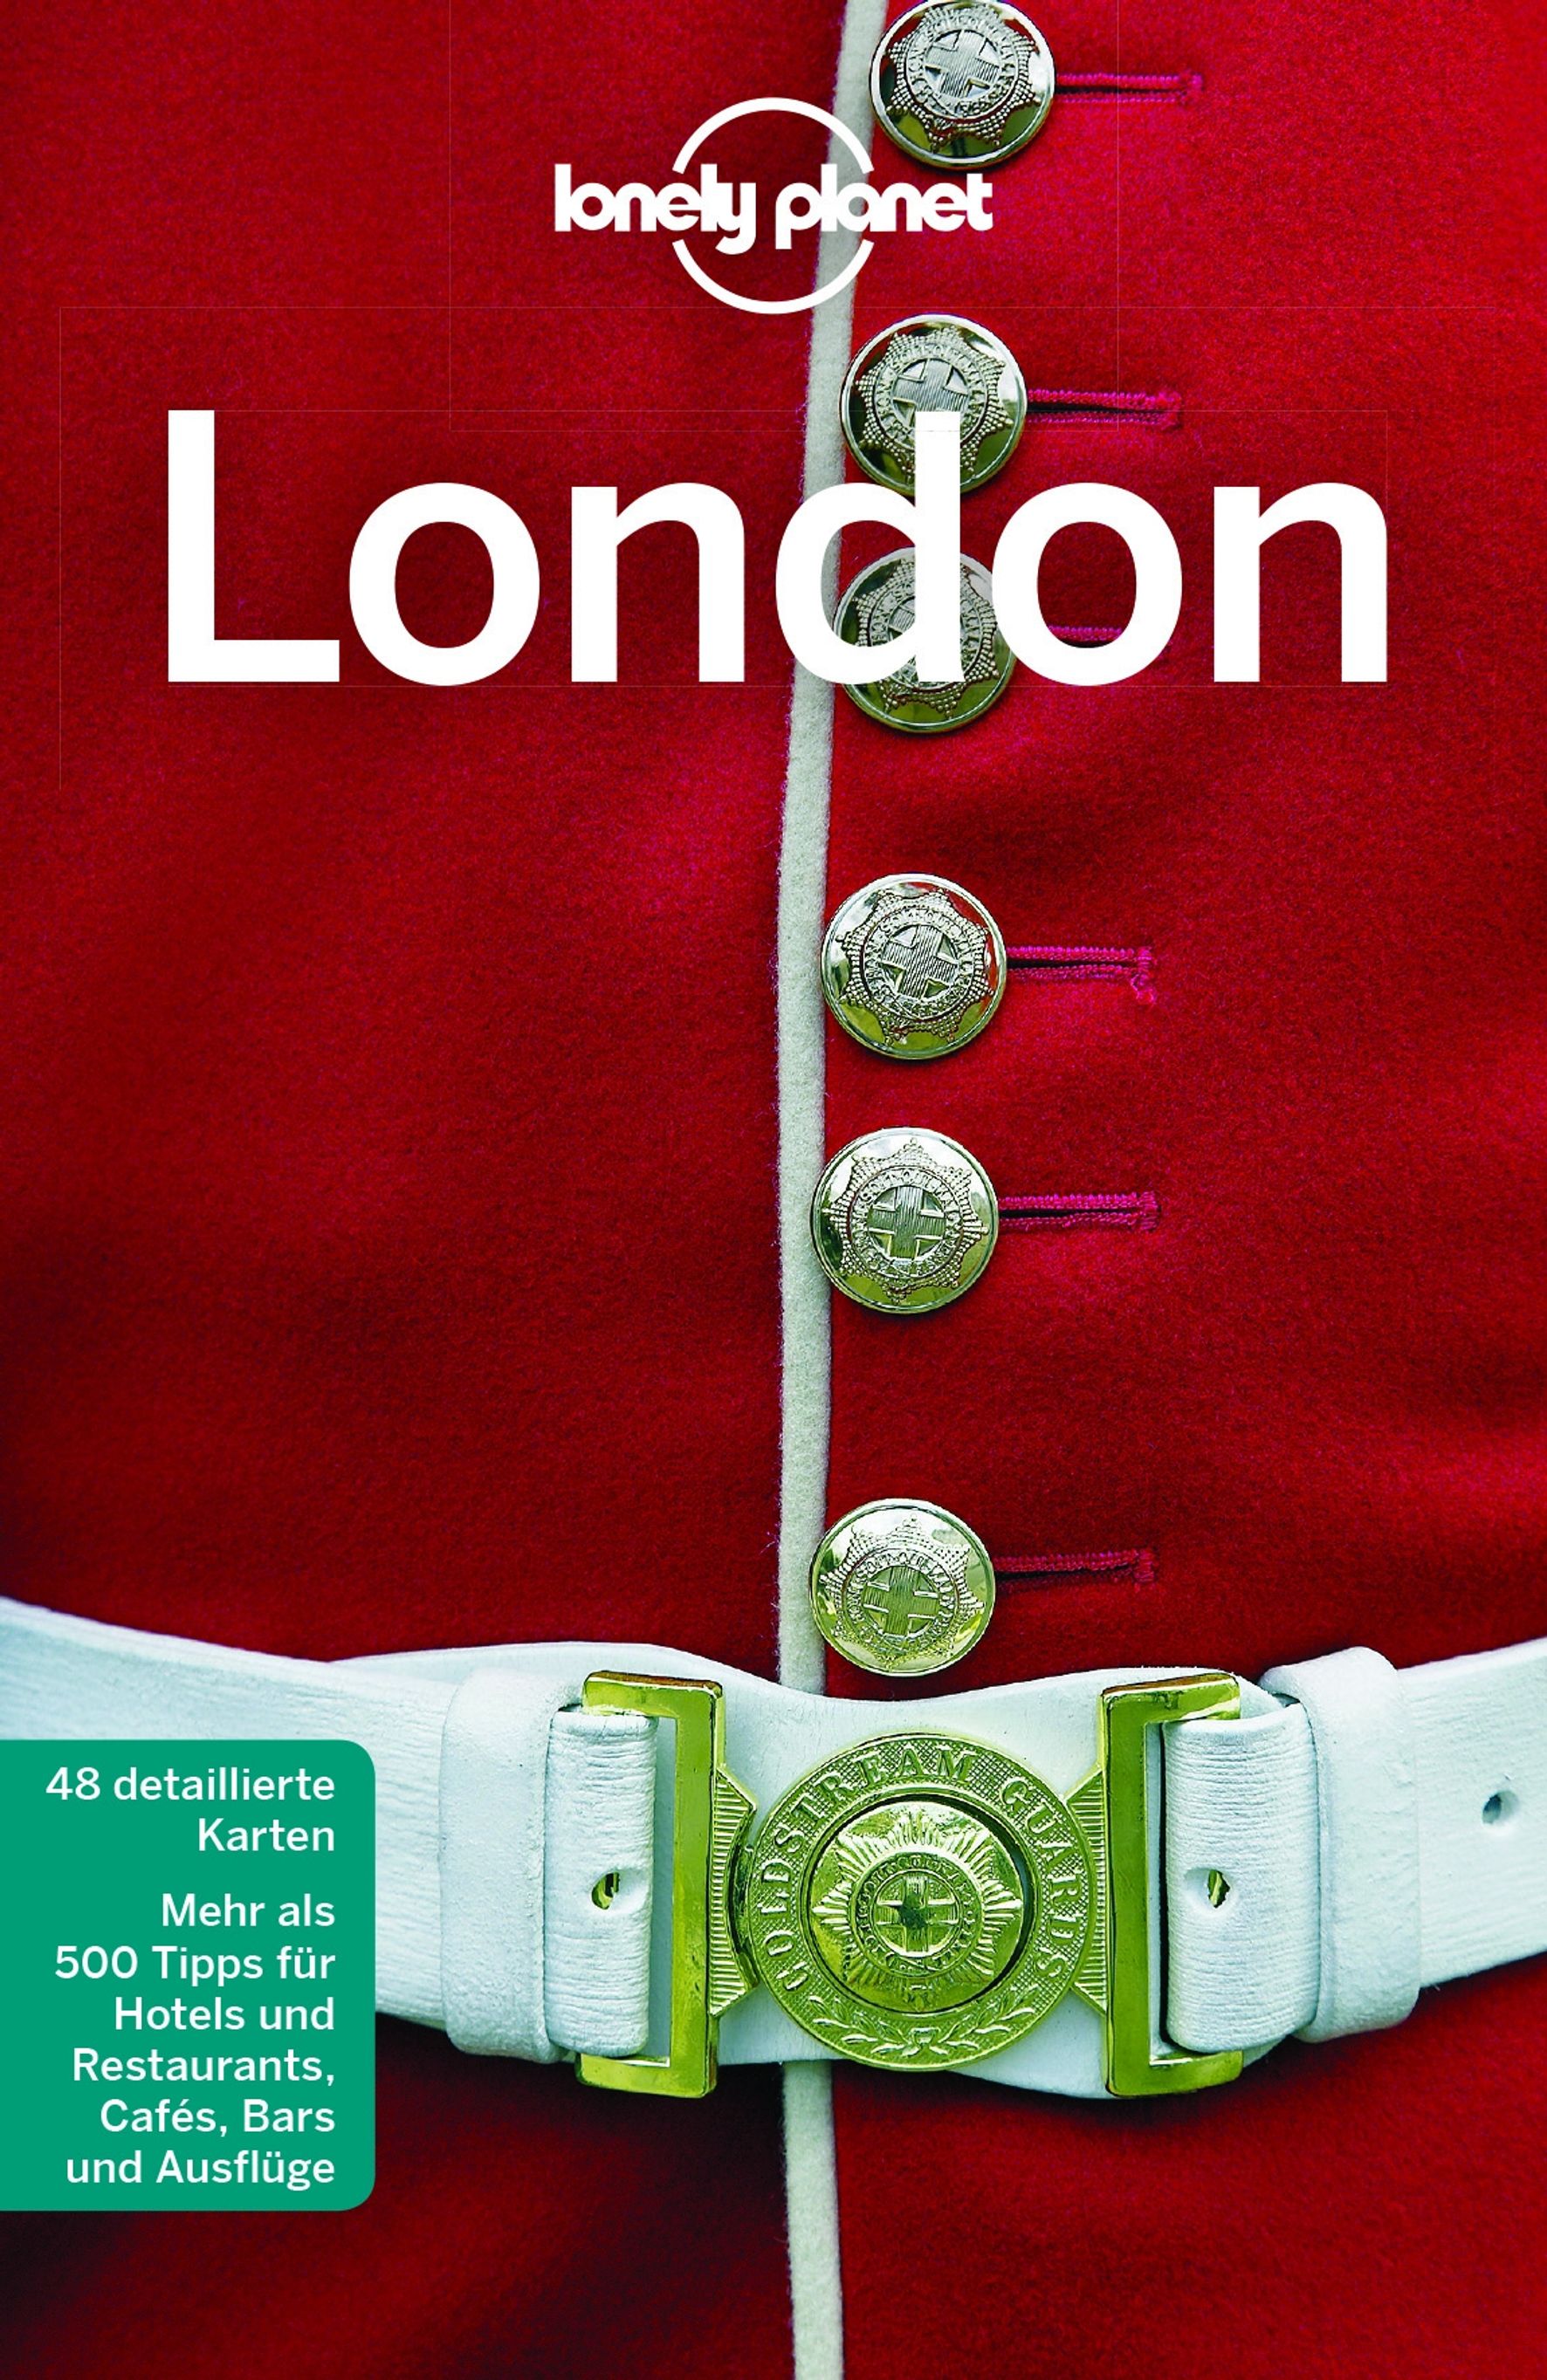 Lonely Planet London (eBook)